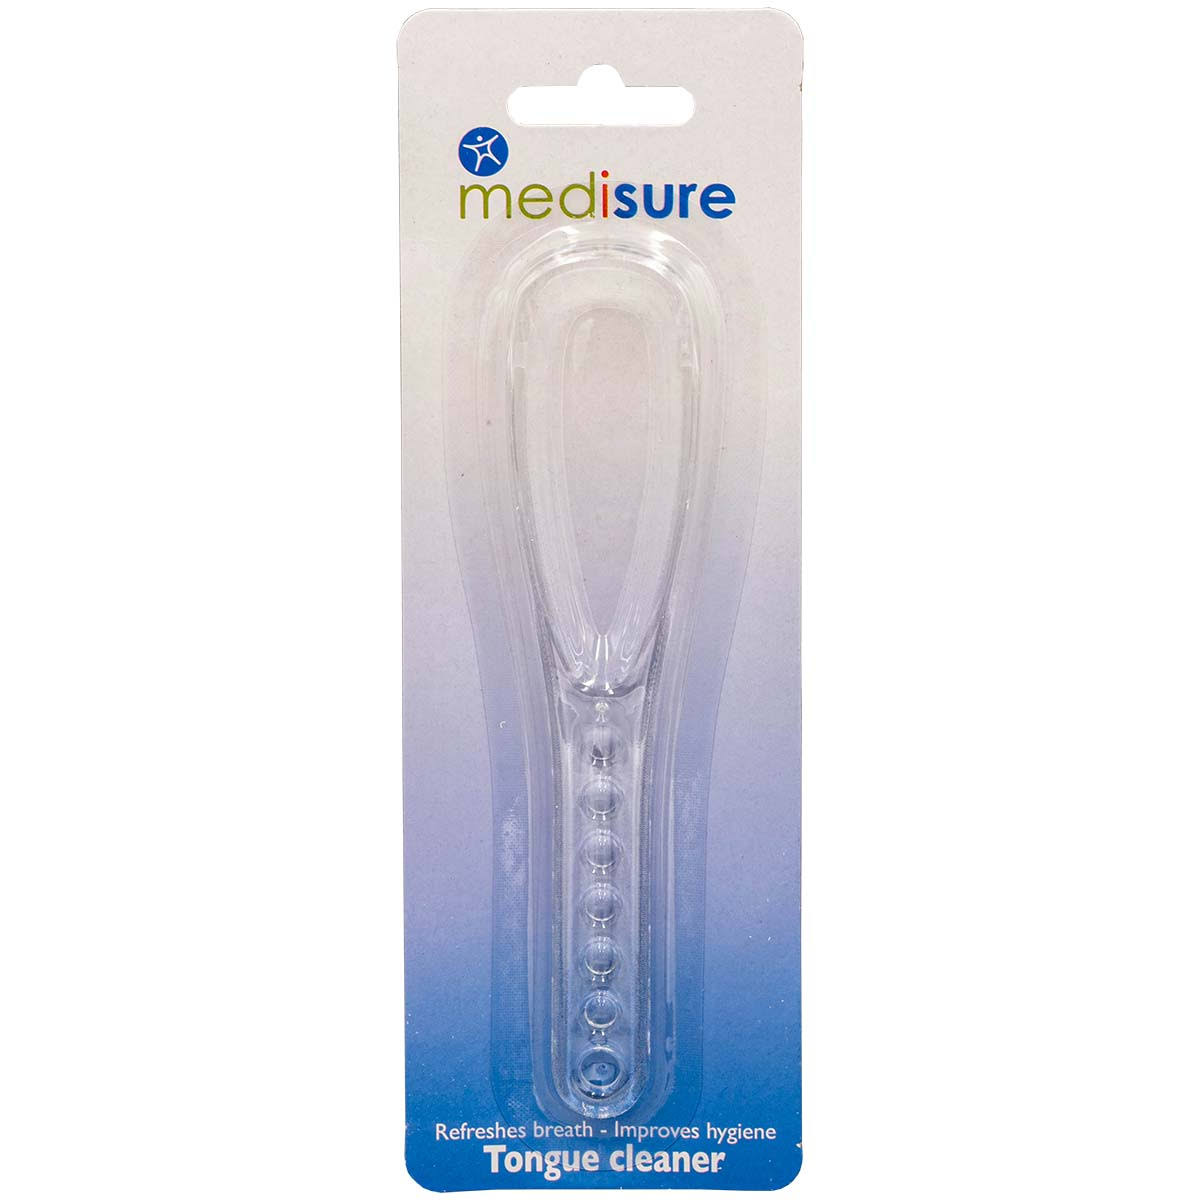 Medisure Tongue Mouth Cleaner | Health Care